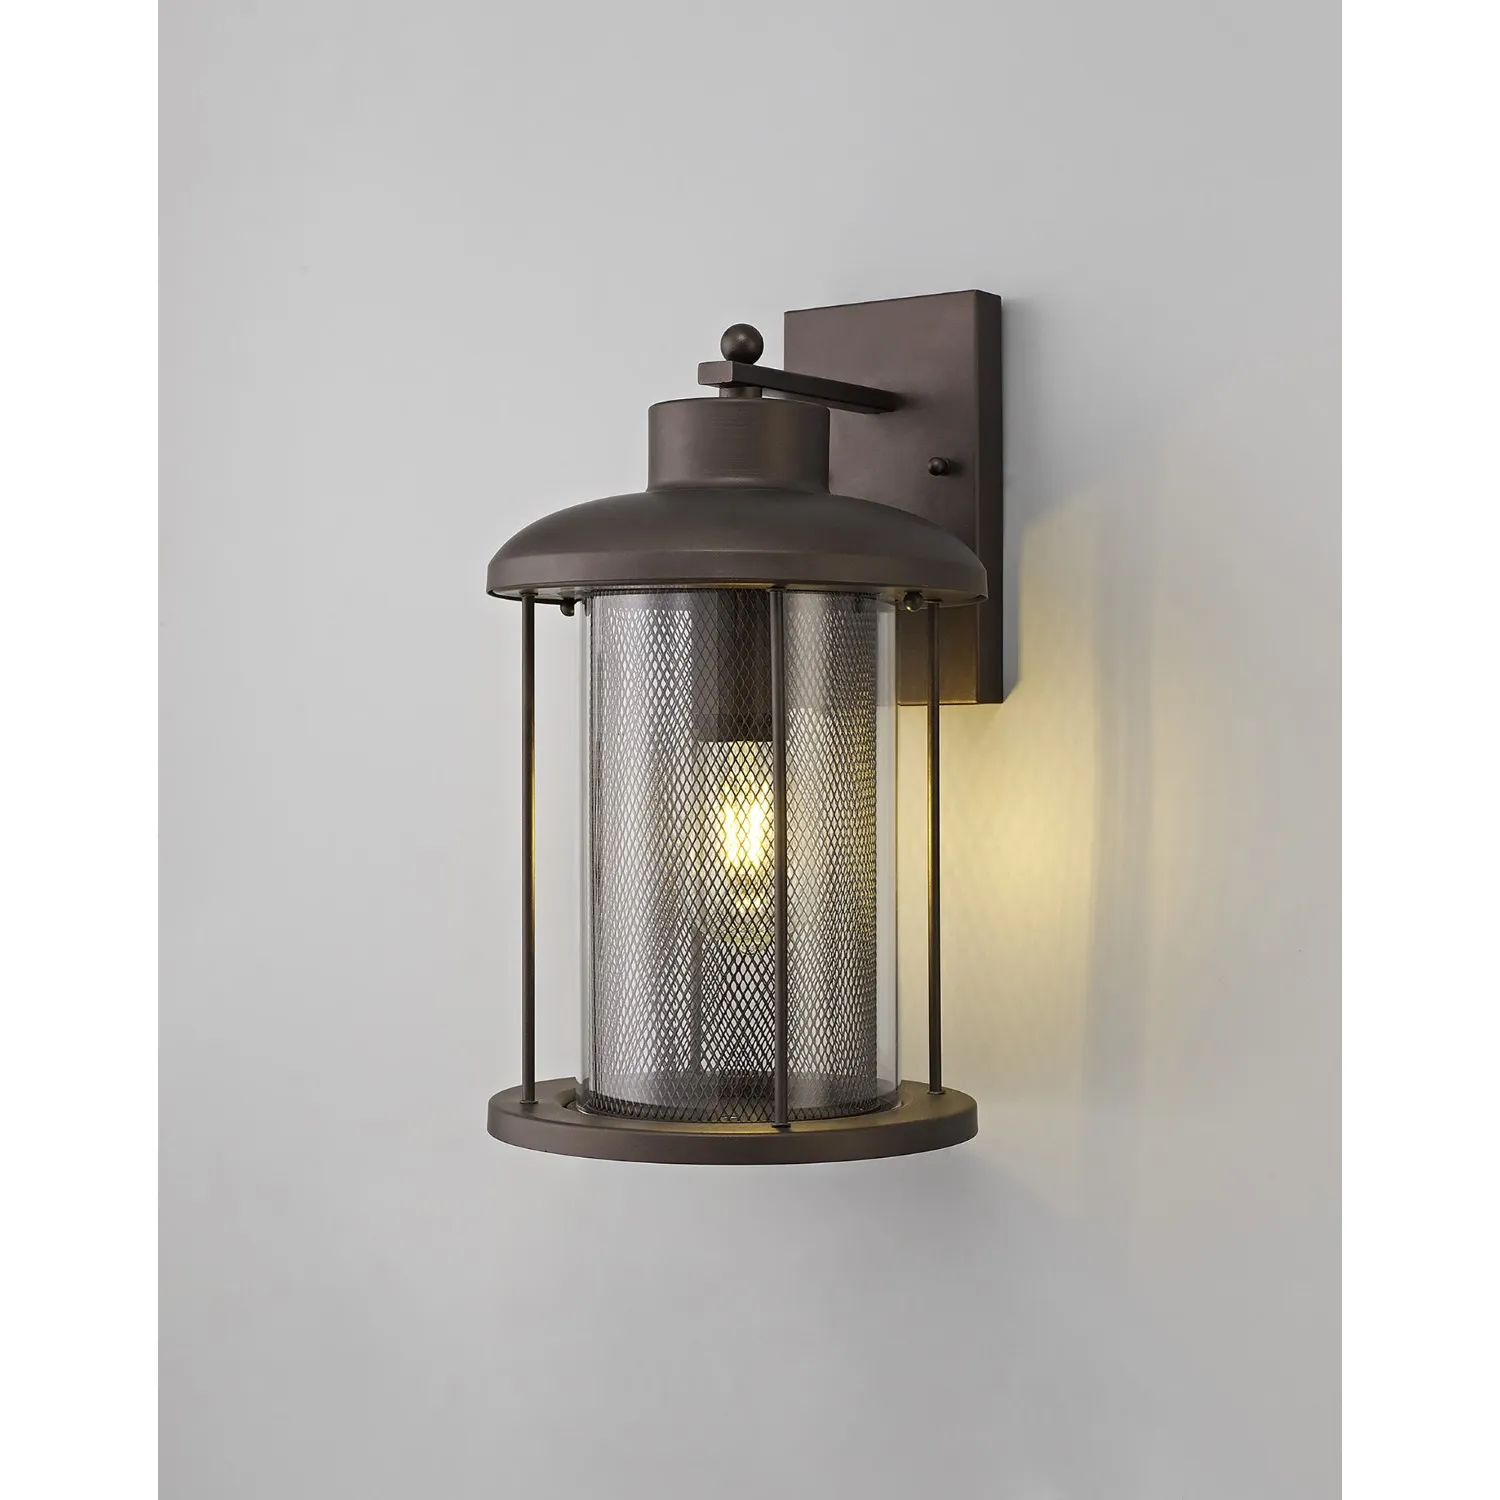 Hampstead Extra Large Wall Lamp, 1 x E27, Antique Bronze Clear Glass, IP54, 2yrs Warranty